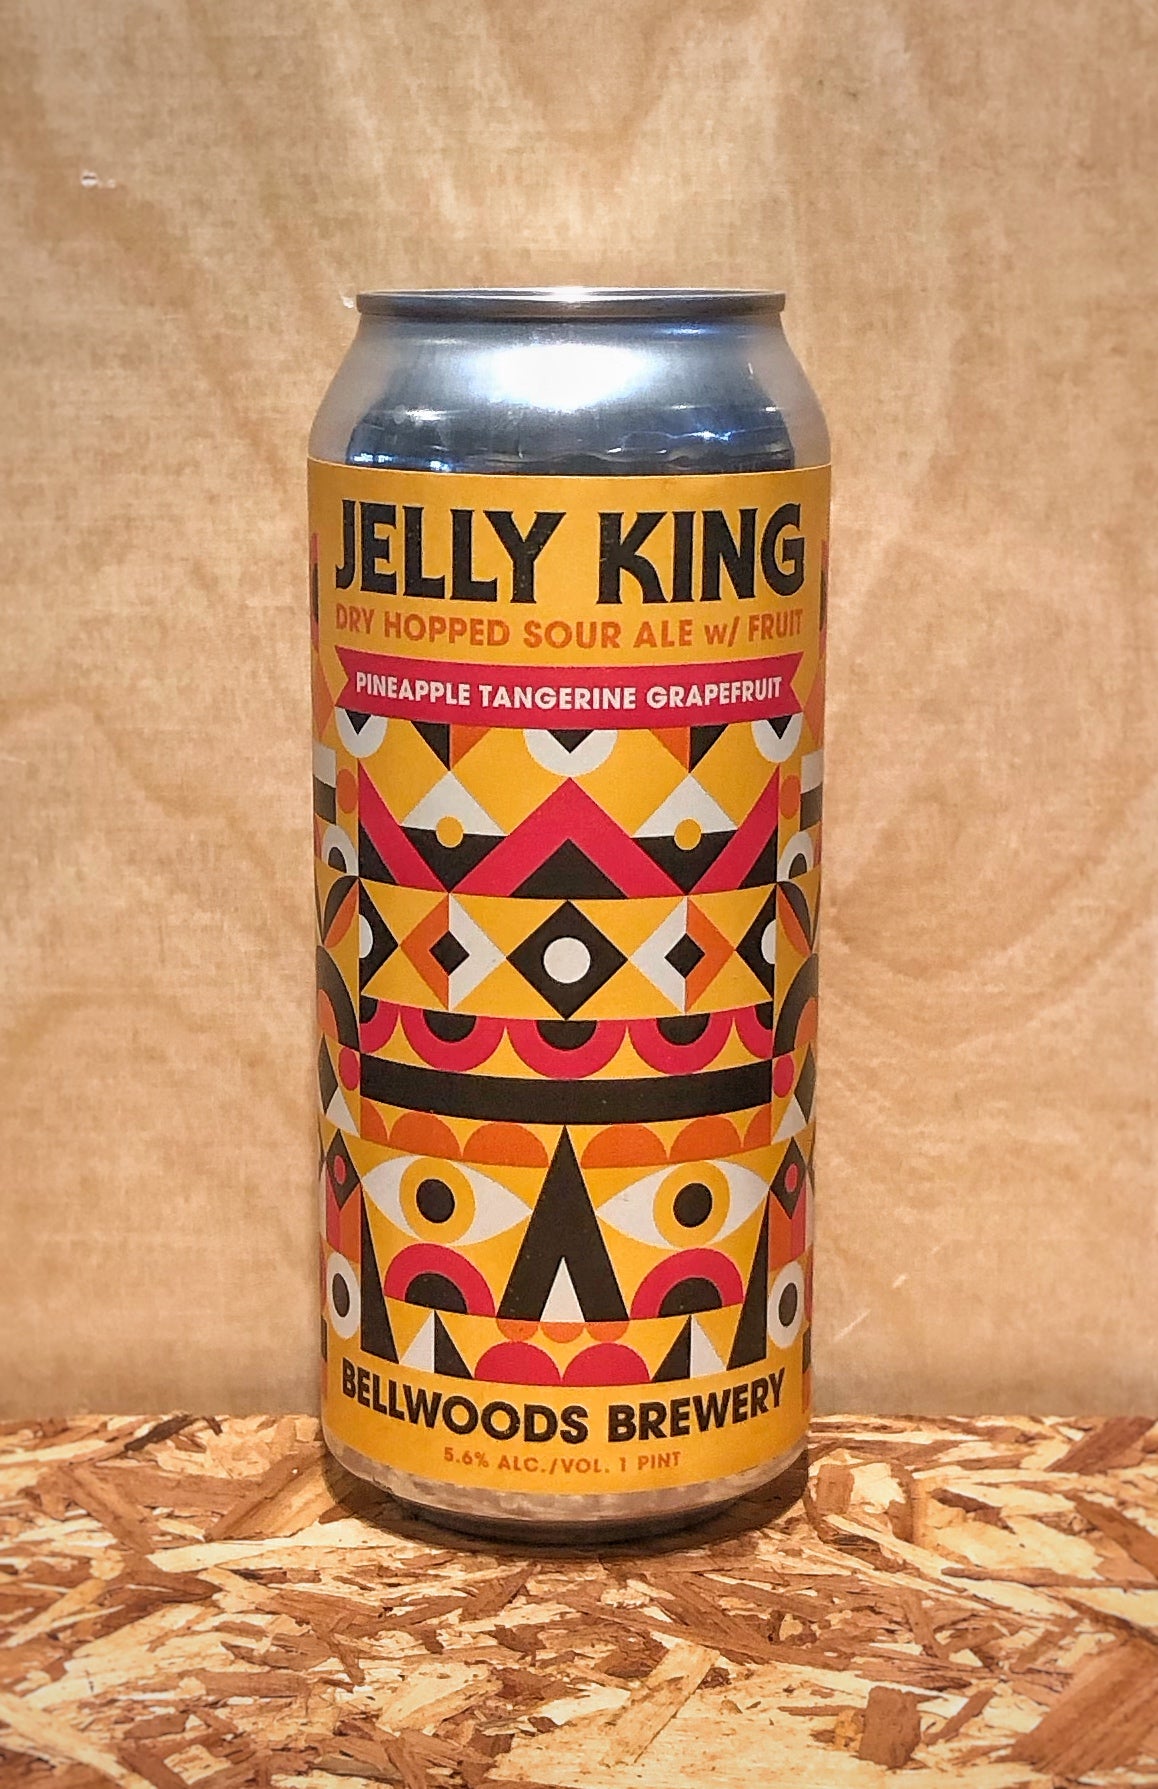 Bellwoods Brewery 'Jelly King' Dry Hopped Sour Ale with Fruit (Toronto, Ontatio)